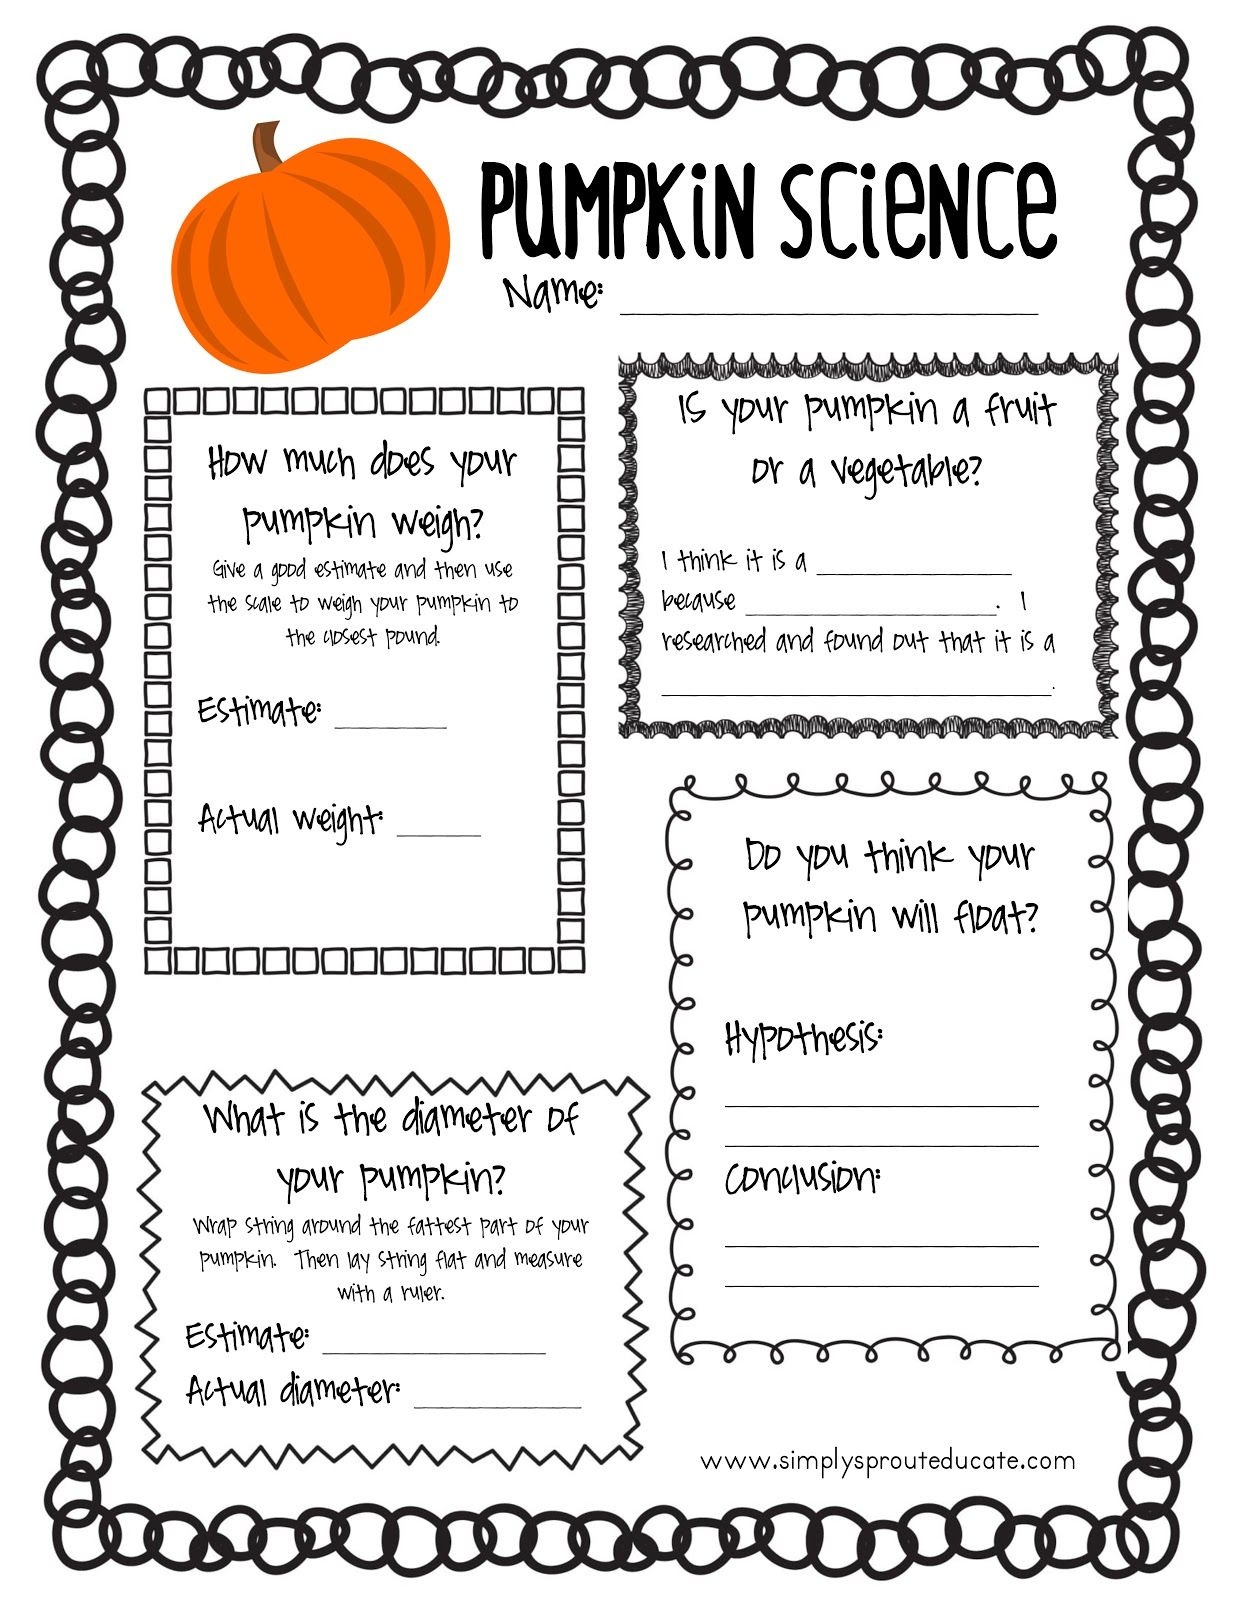 Simply Sprout: Free Printable Halloween Science | Science - Free Printable Science Lessons